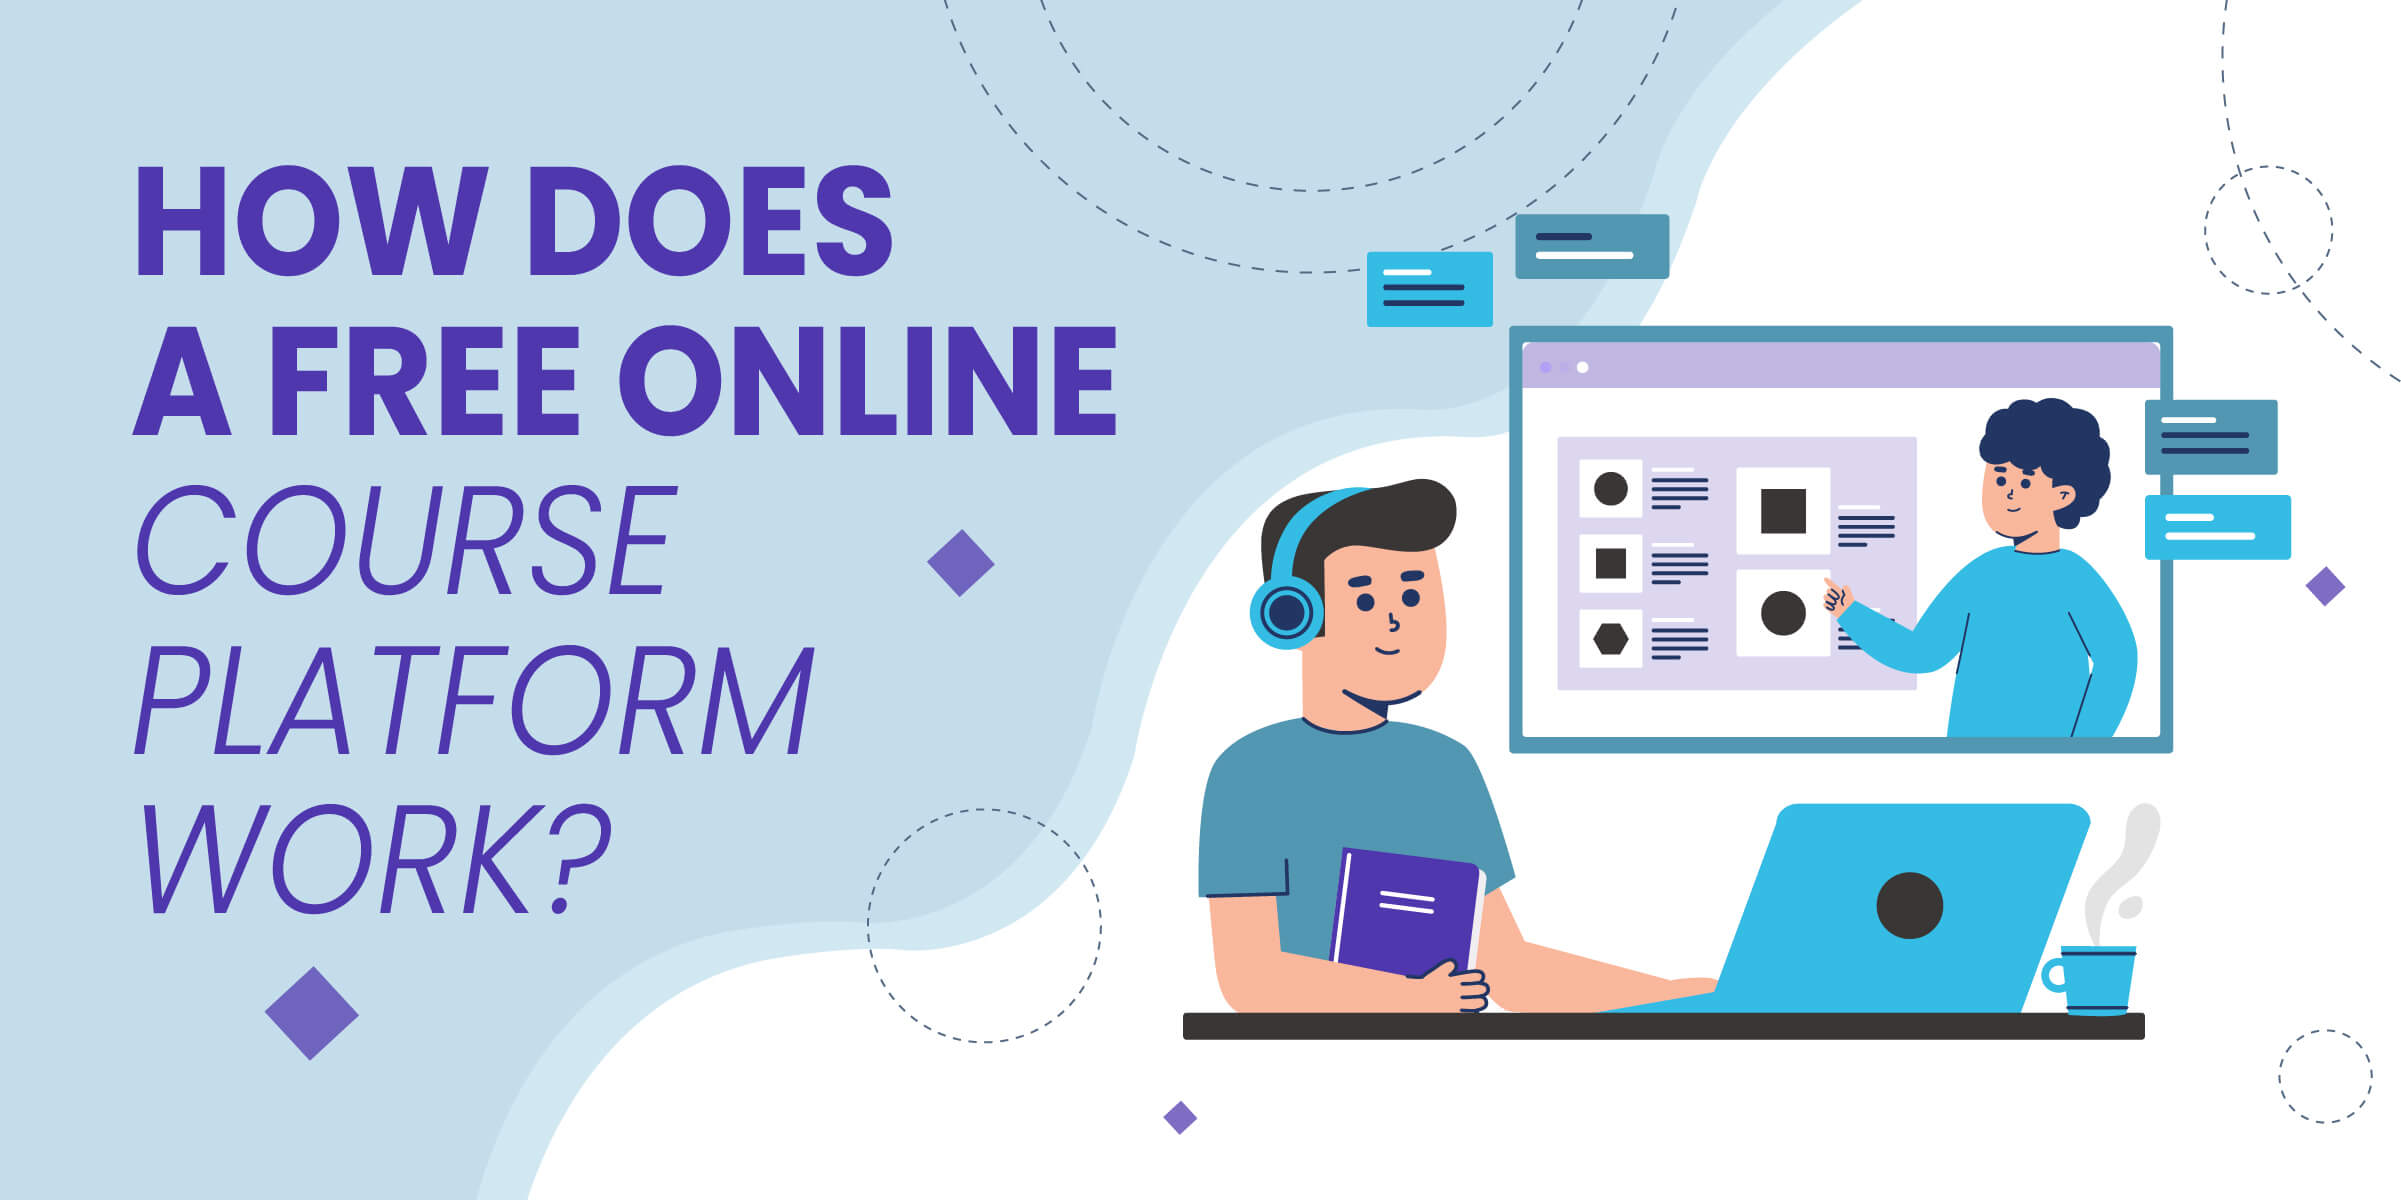 How Does a Free Online Course Platform Work